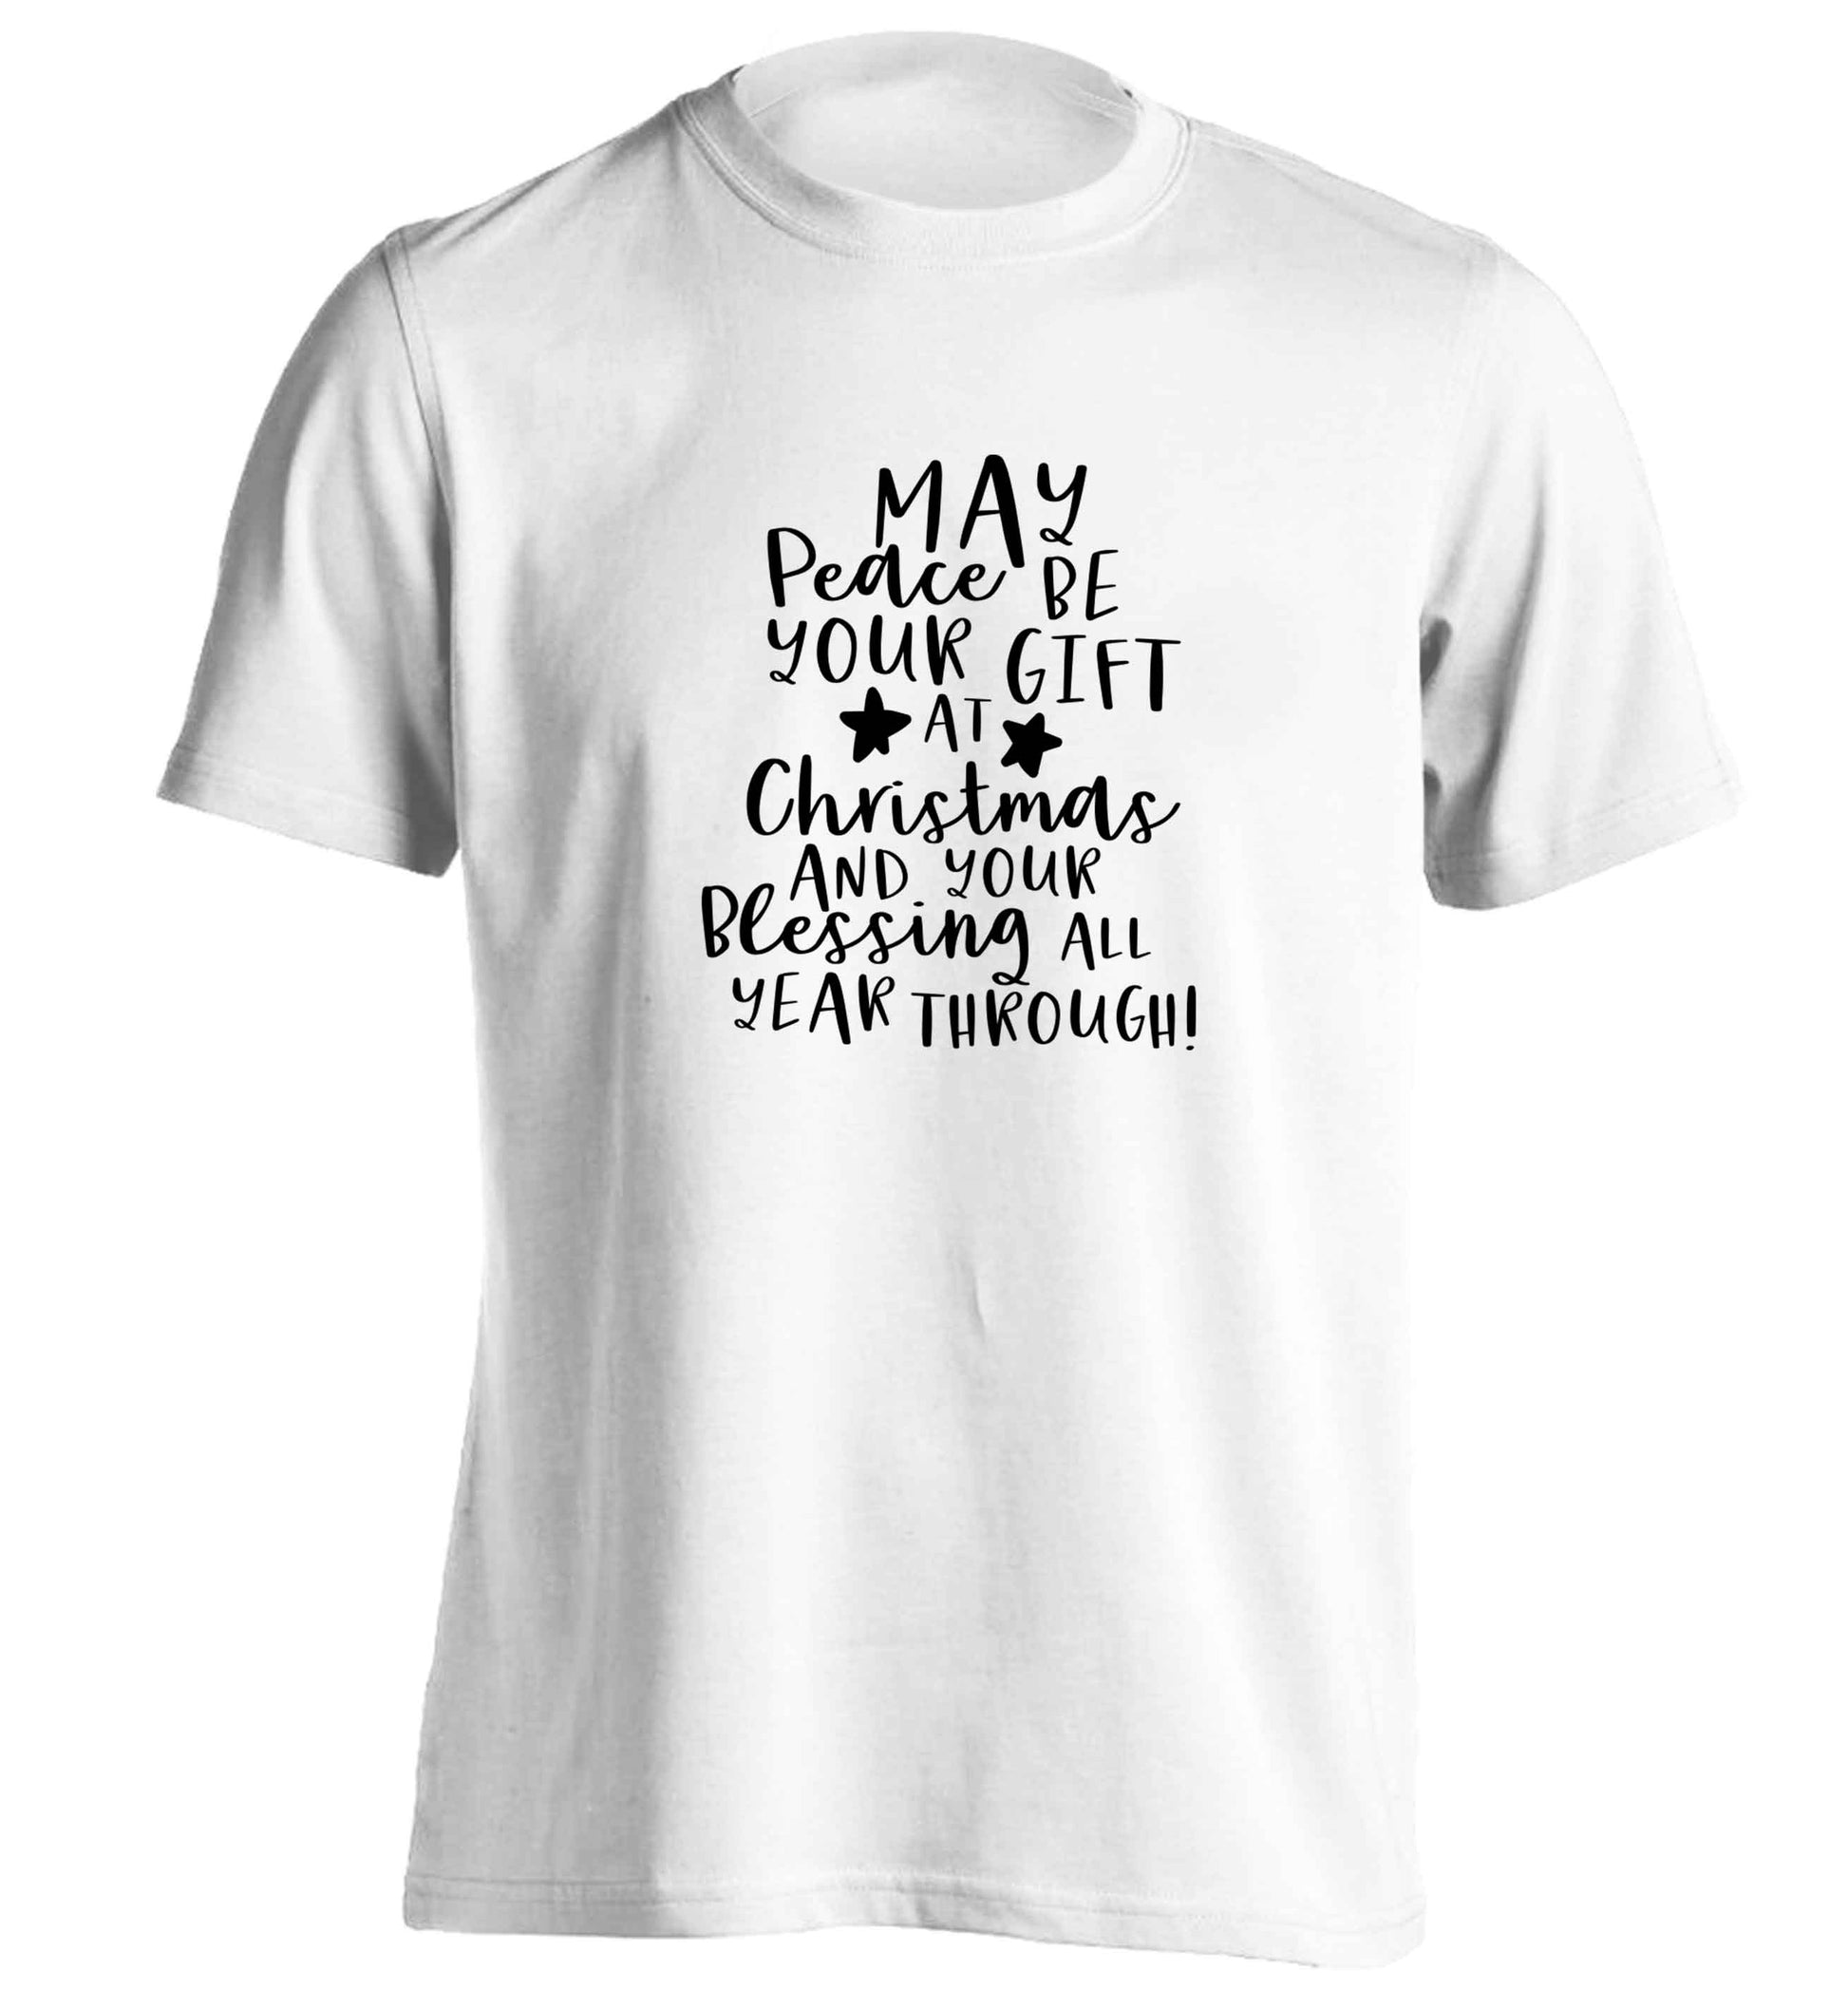 Peace be your Gift at Christmas Gift adults unisex white Tshirt 2XL